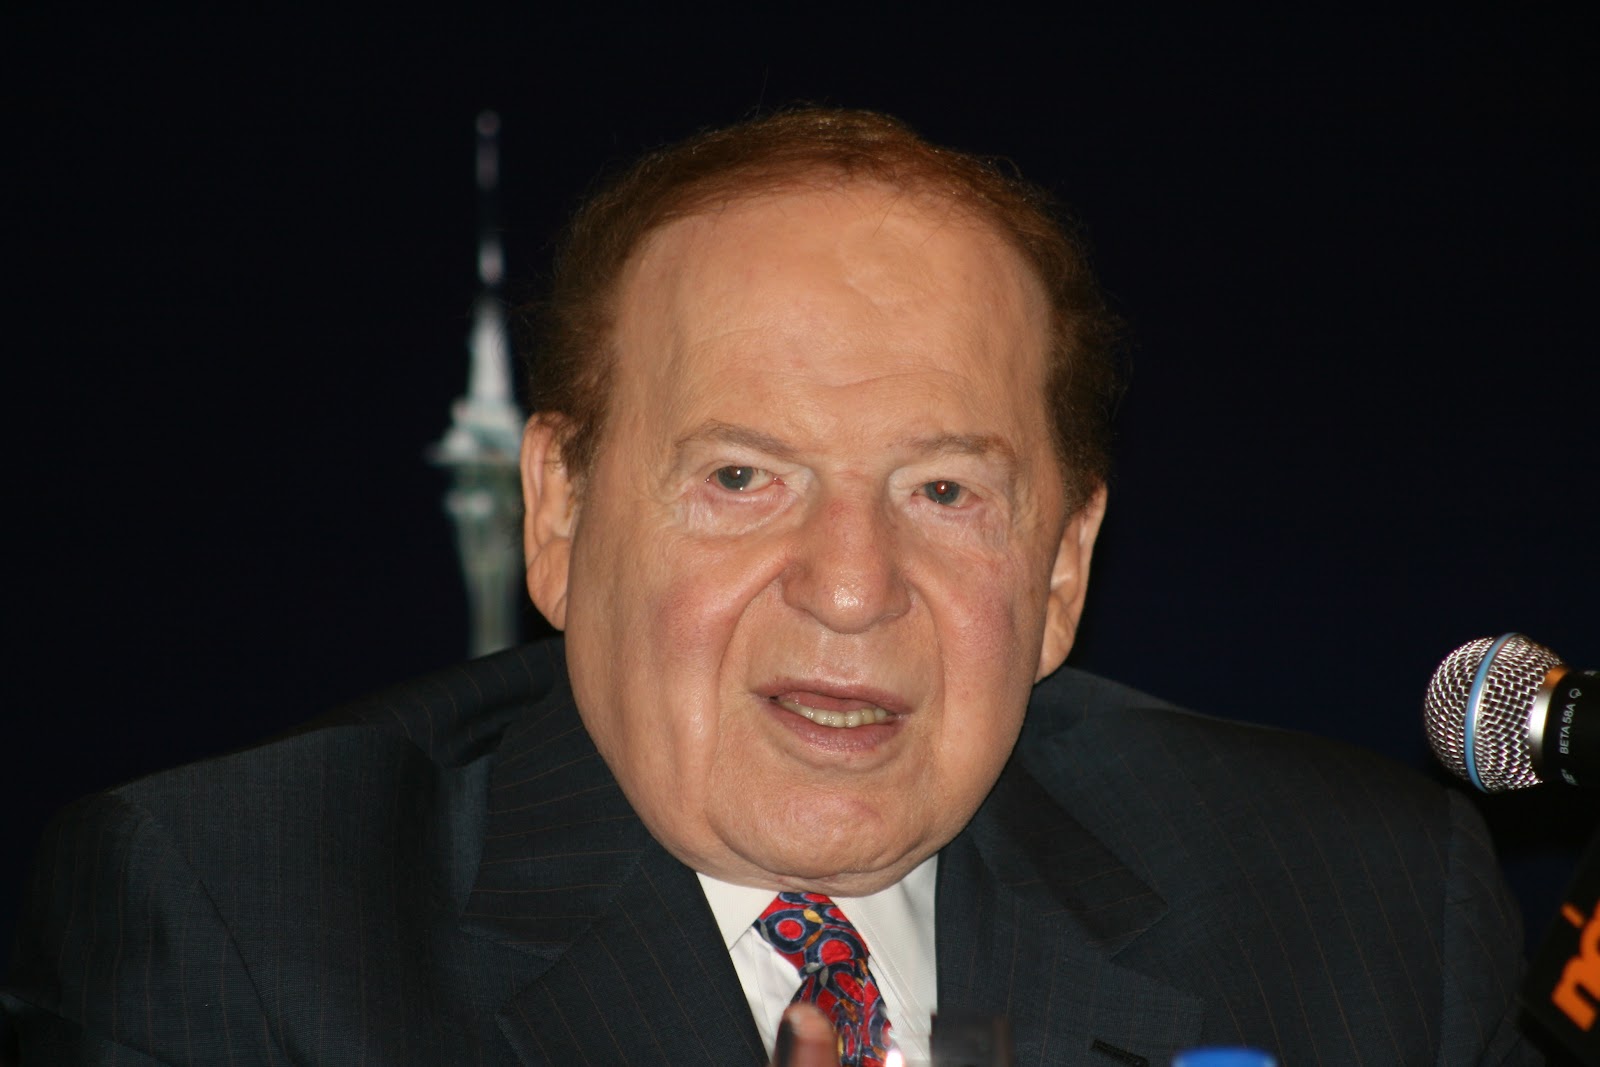 The life of Sheldon Adelson